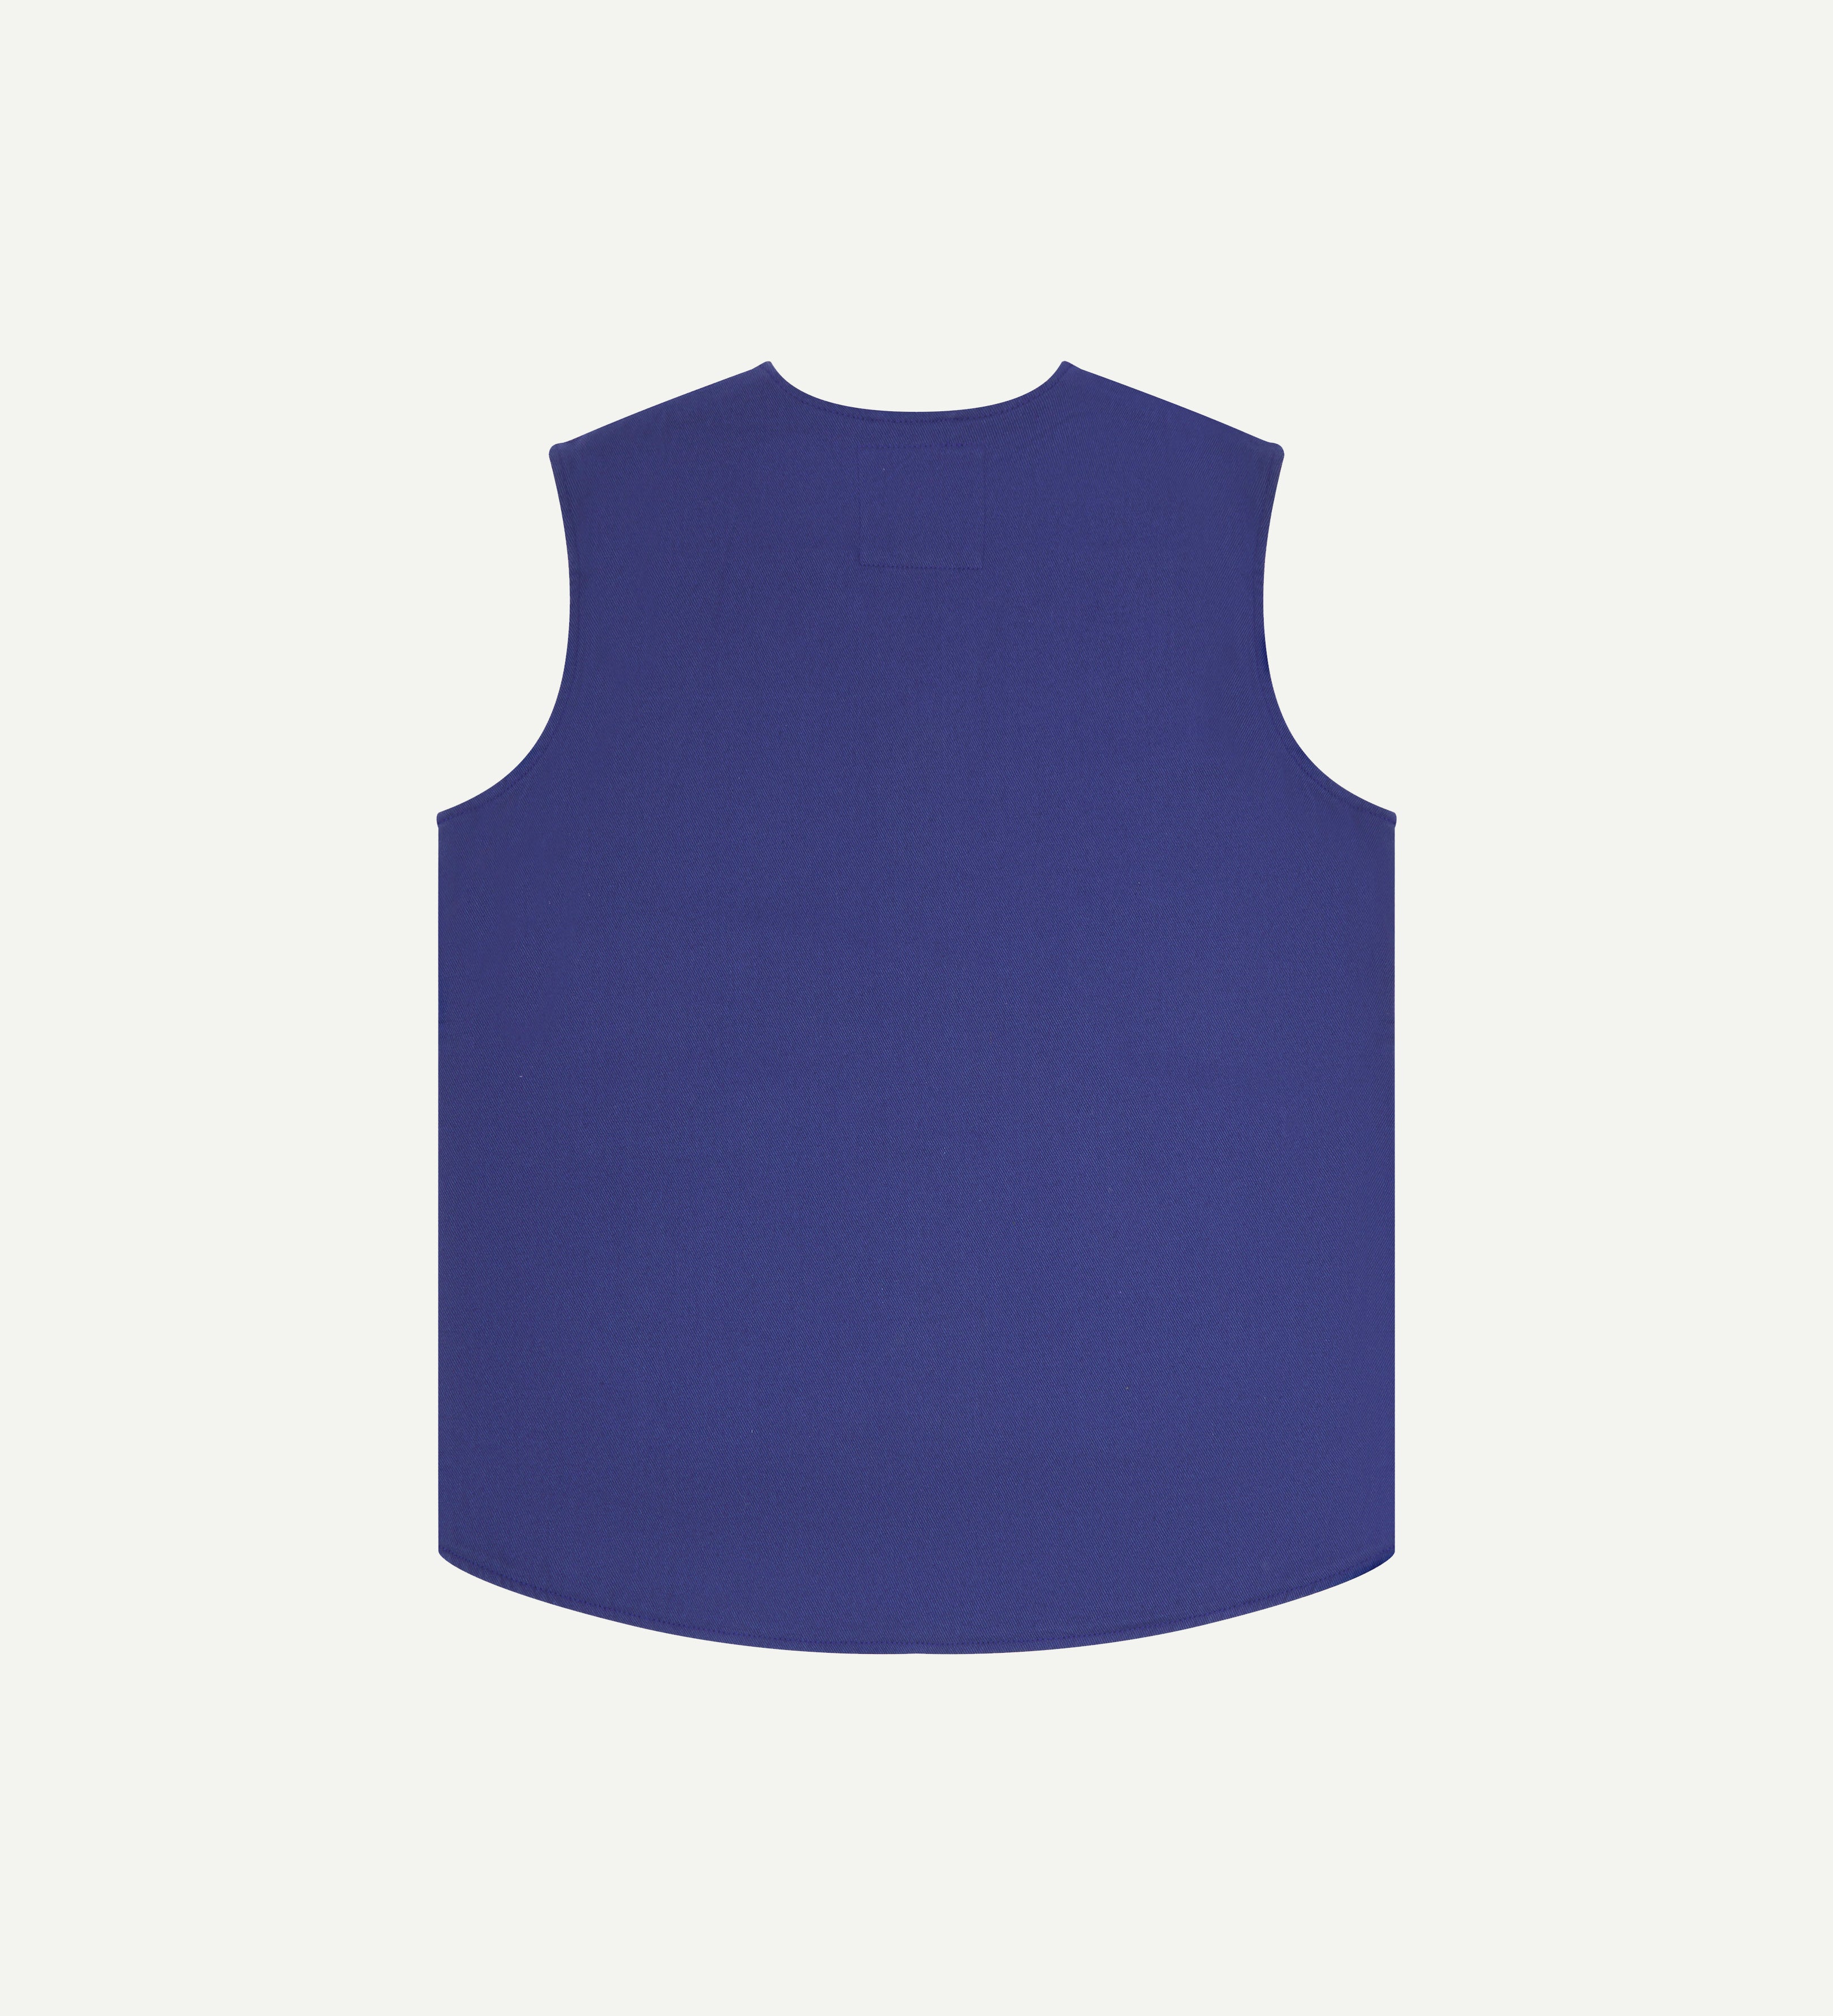 Flat back shot of #3036, Ultra Blue organic cotton-drill vest from Uskees.